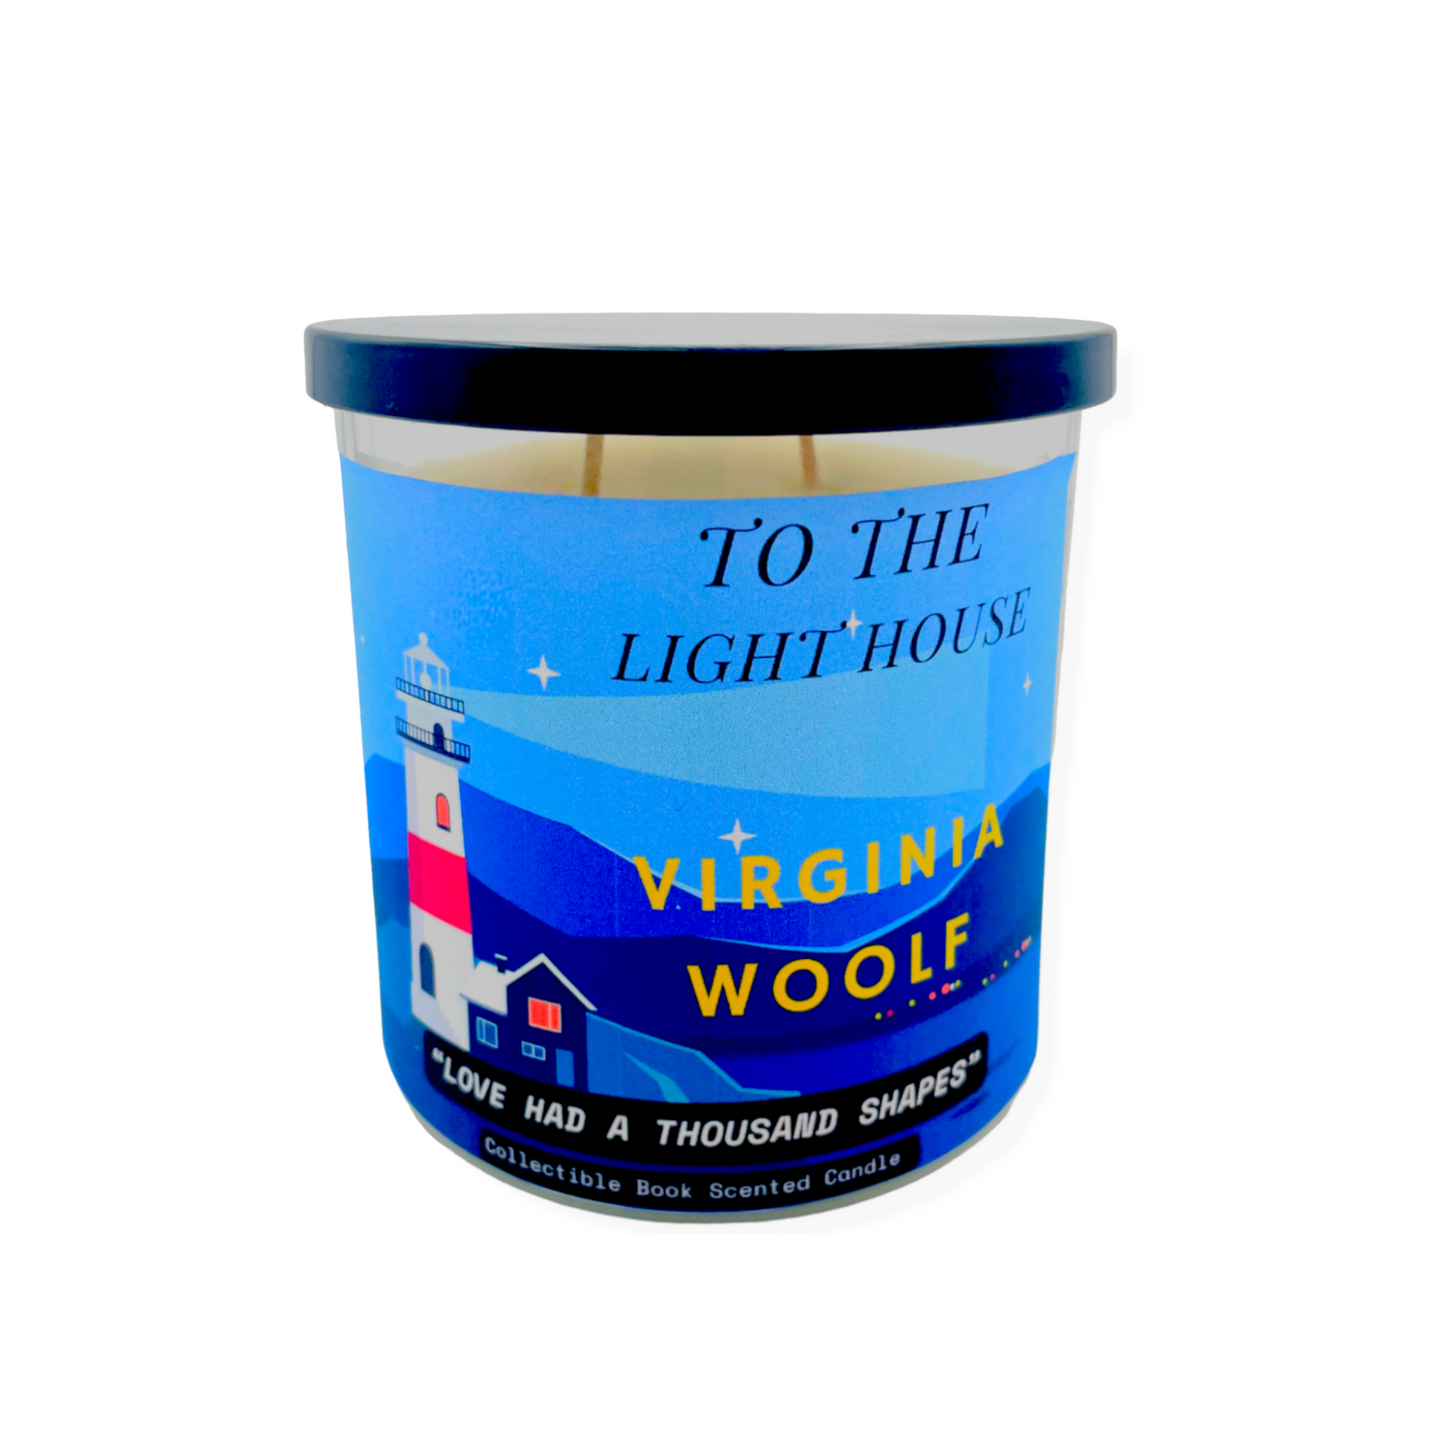 To the Lighthouse by Virginia Woolf | Literature Candle